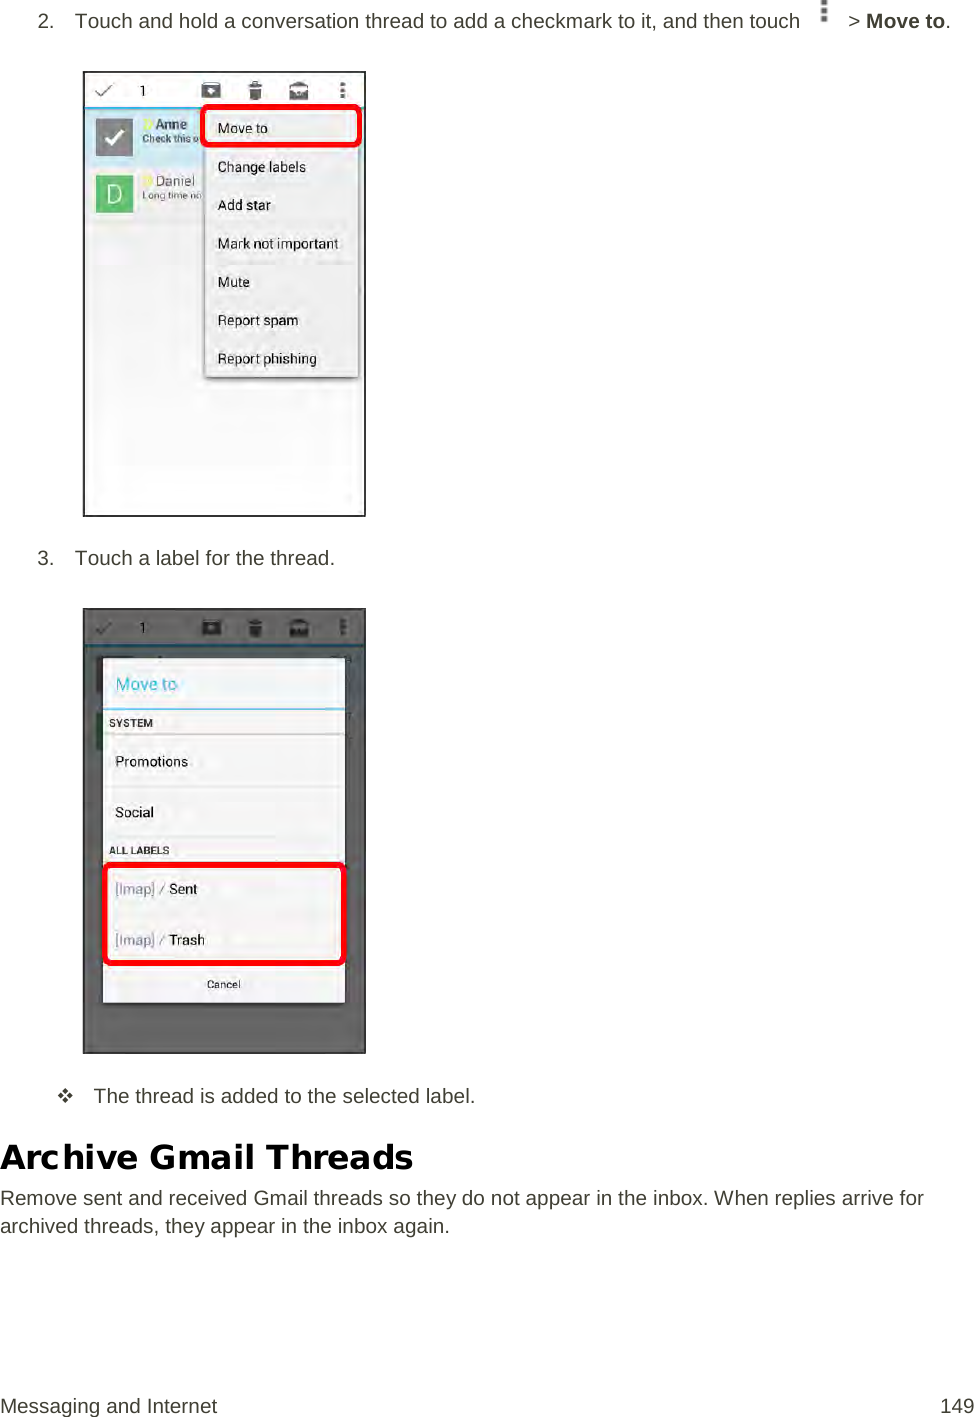 2. Touch and hold a conversation thread to add a checkmark to it, and then touch   &gt; Move to.   3. Touch a label for the thread.    The thread is added to the selected label. Archive Gmail Threads Remove sent and received Gmail threads so they do not appear in the inbox. When replies arrive for archived threads, they appear in the inbox again. Messaging and Internet 149 